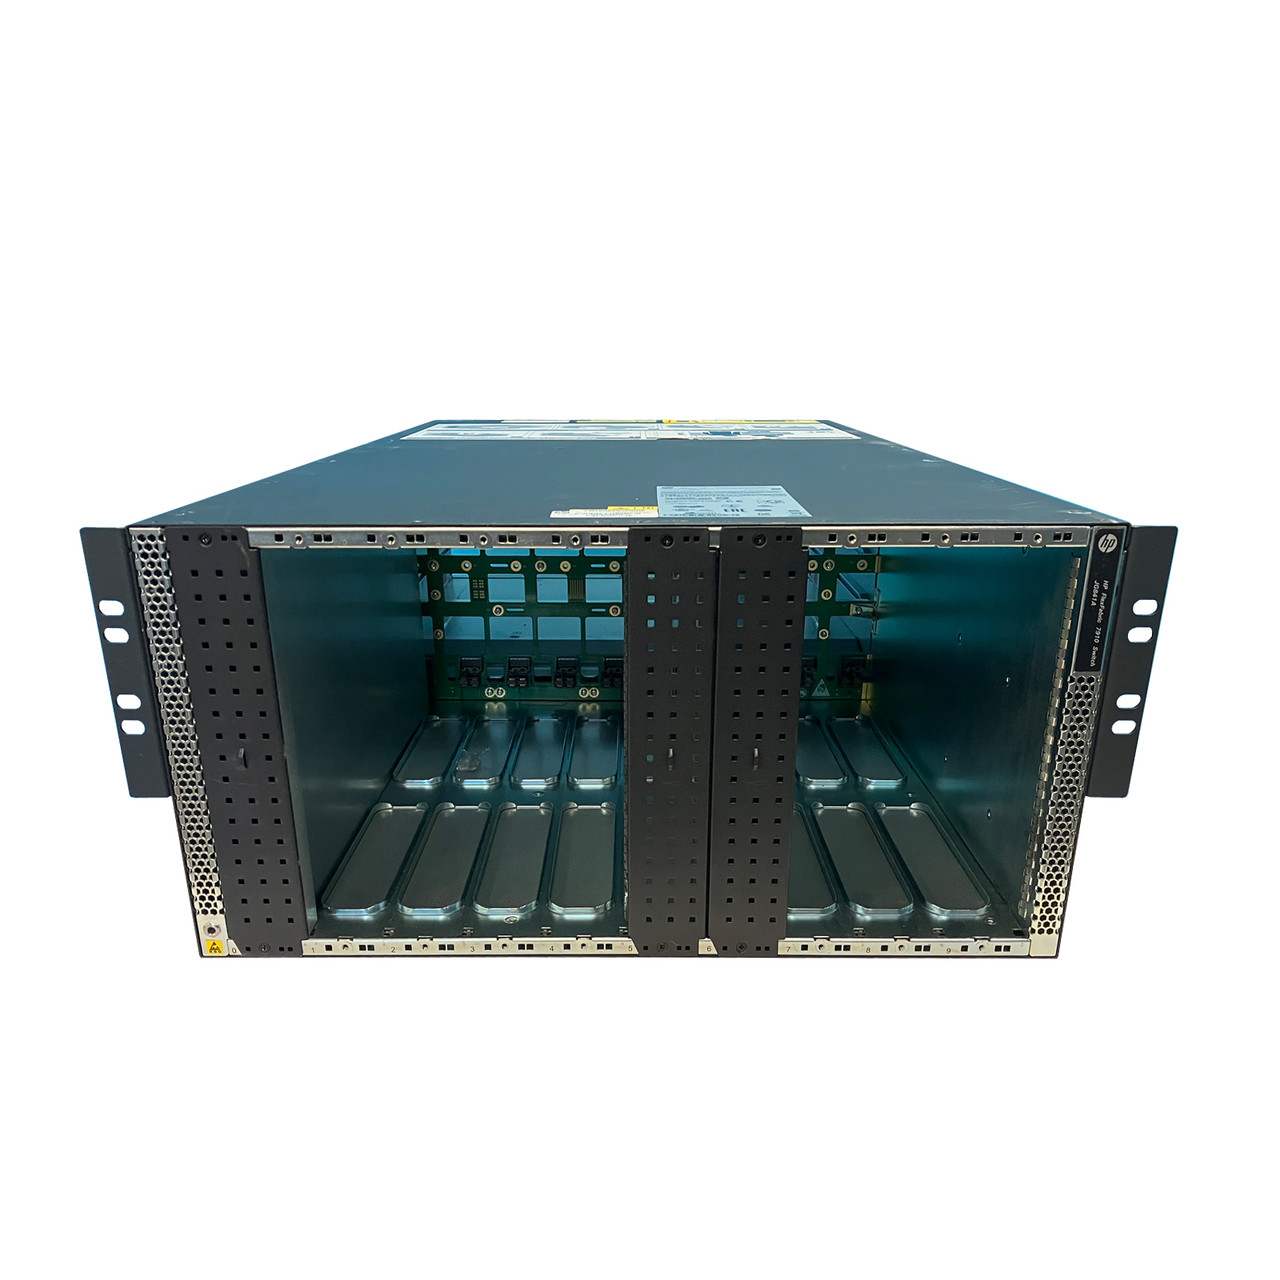 HPe JG841A FlexFabric 7910 Switch Chassis CTO